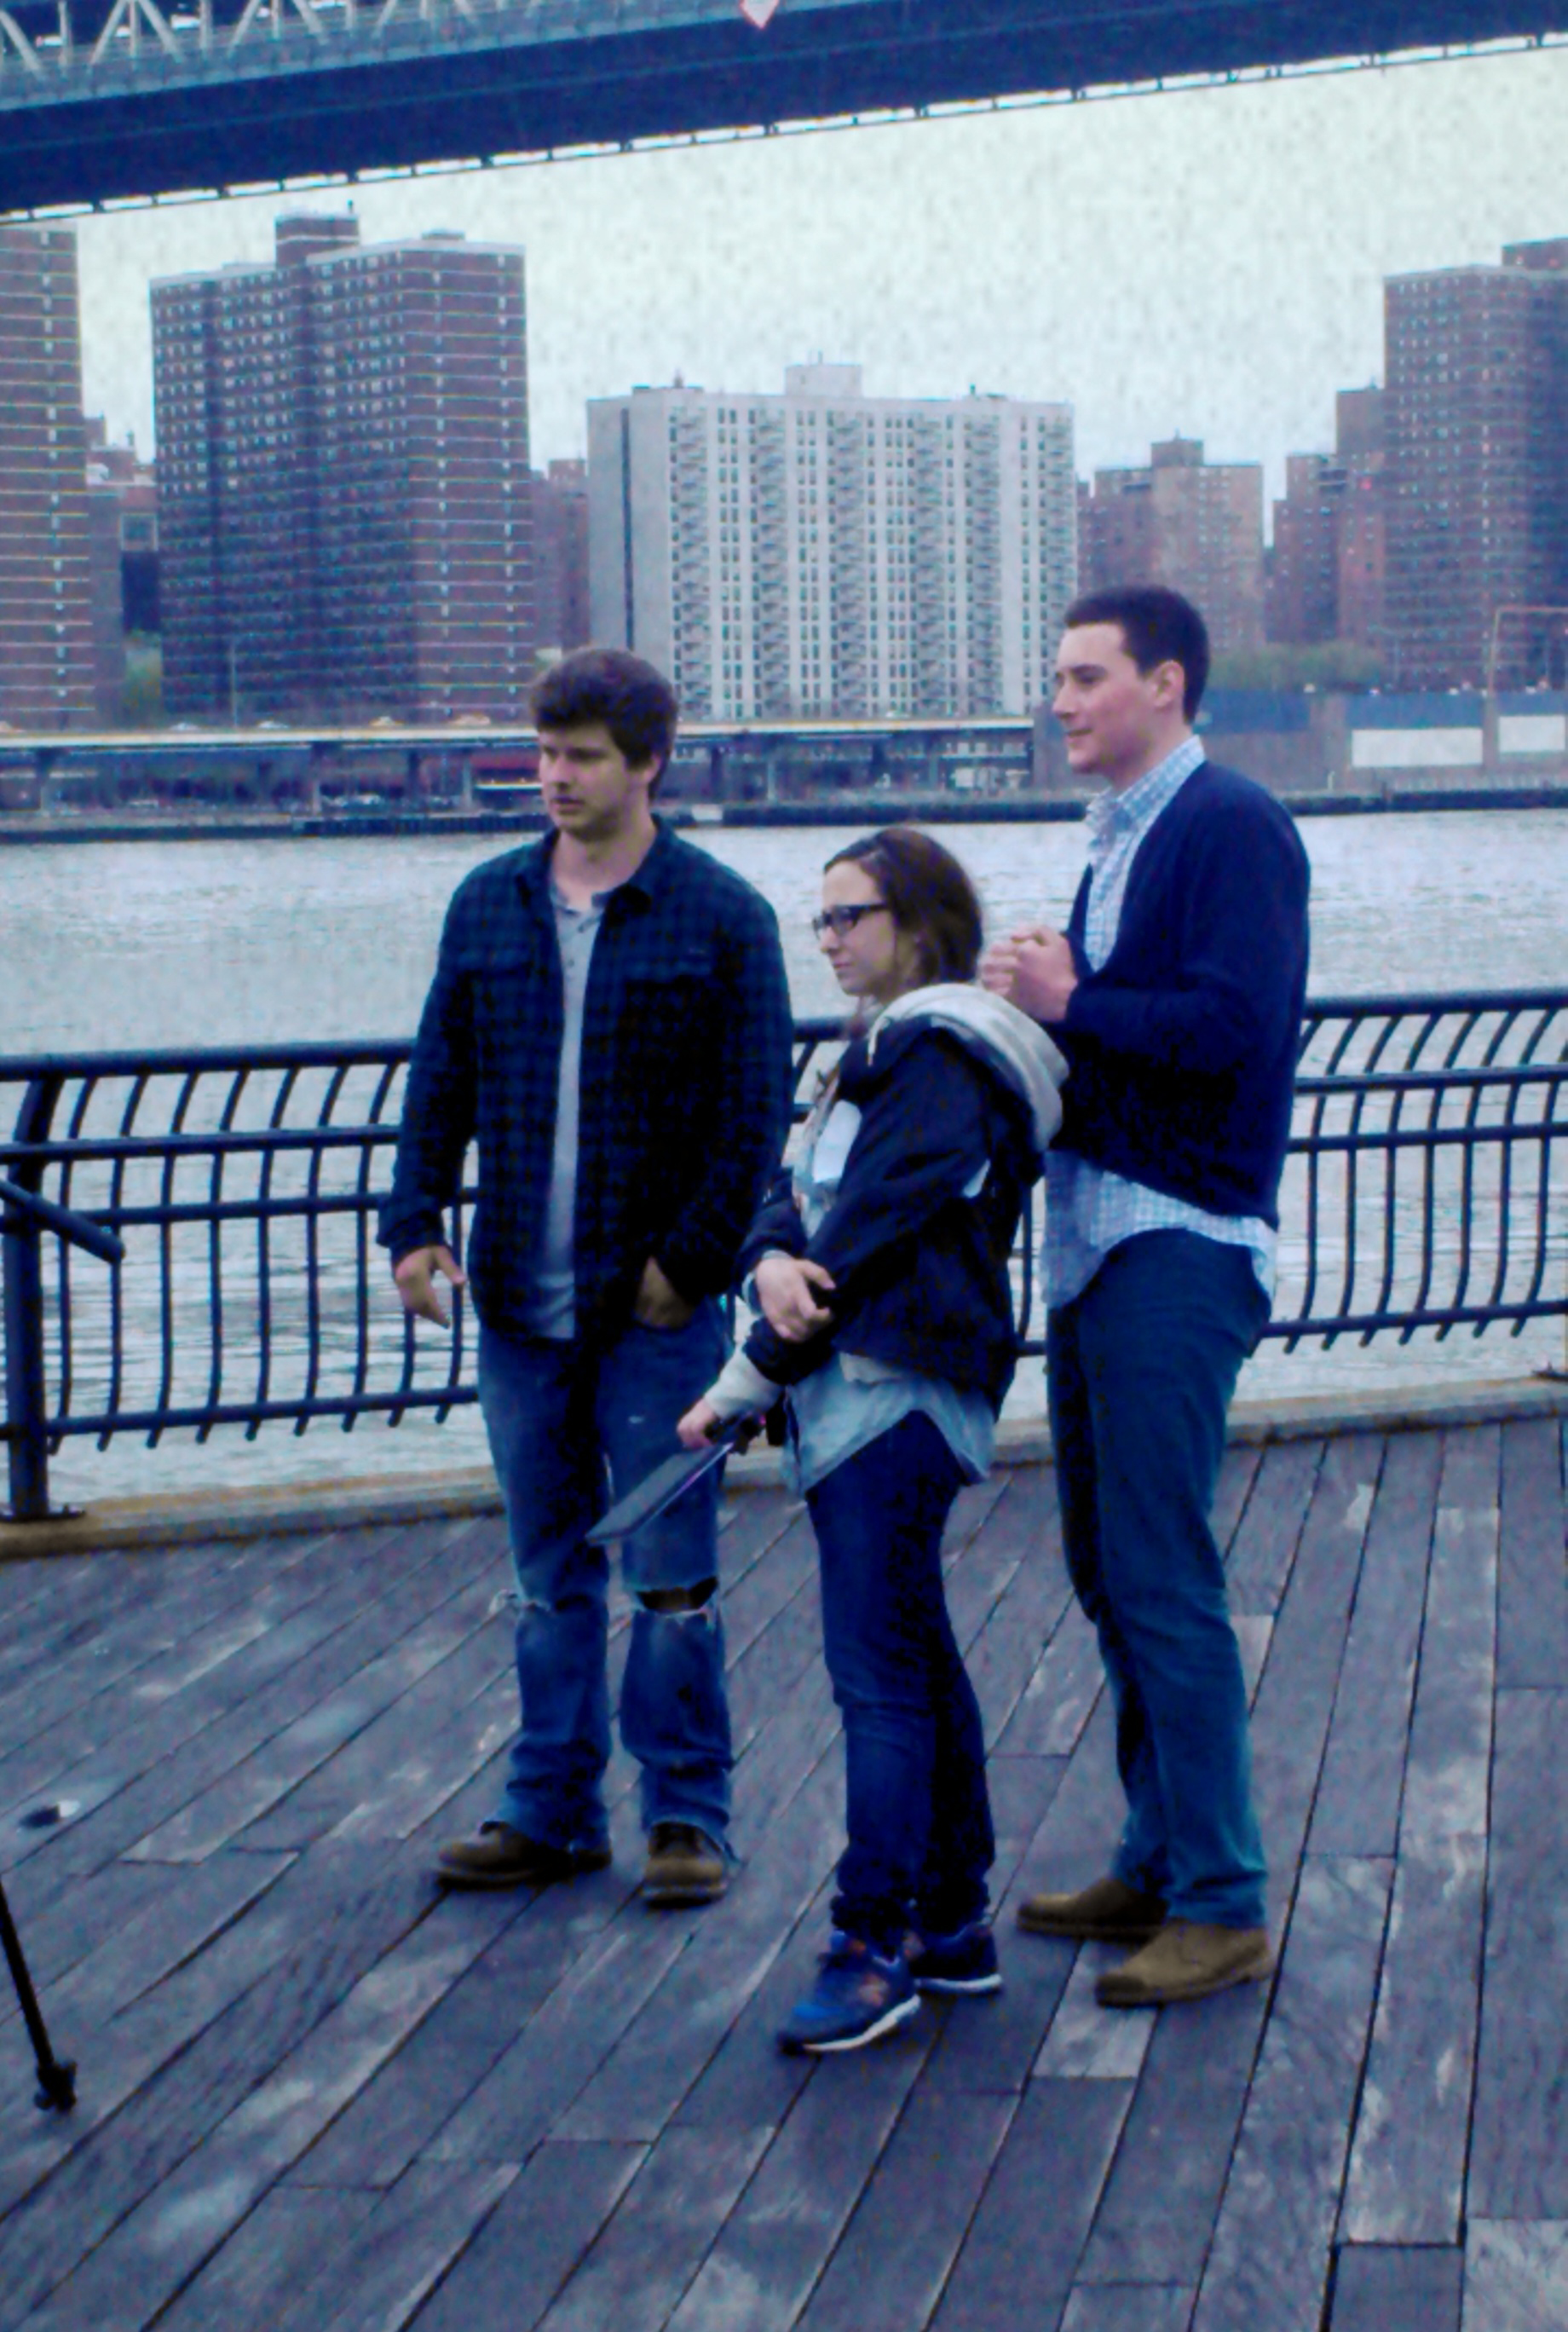 Alex Donnolo, Martina Casas, and Robert Lind on the set of Bridge to Cross.